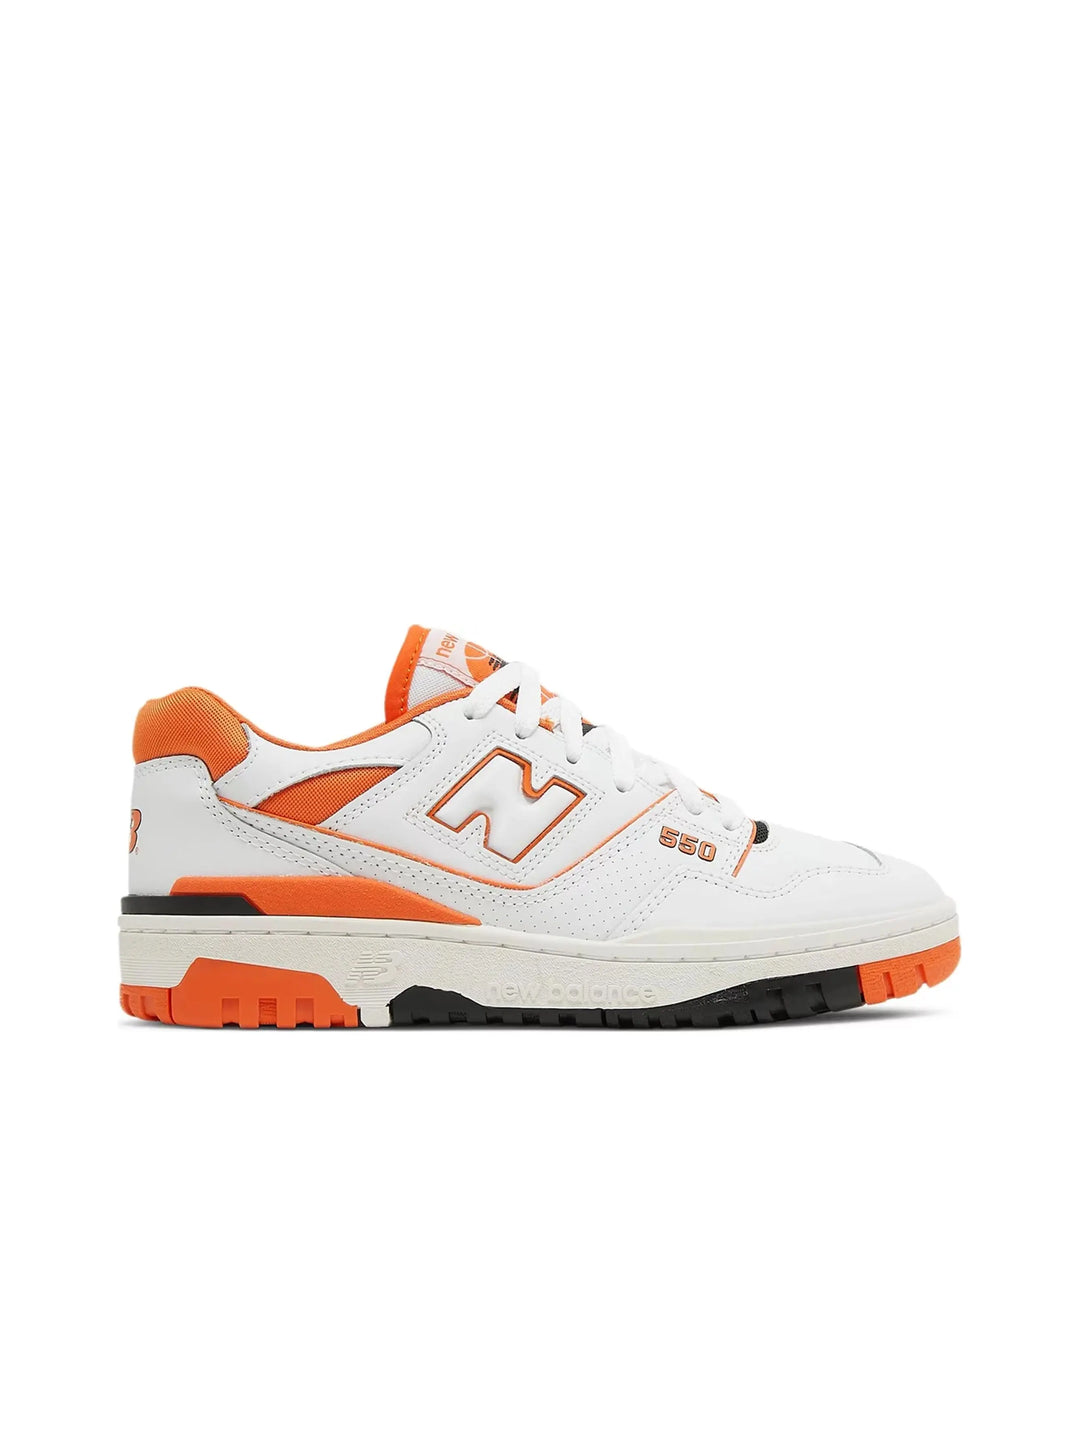 New Balance 550 Syracuse in Auckland, New Zealand - Shop name